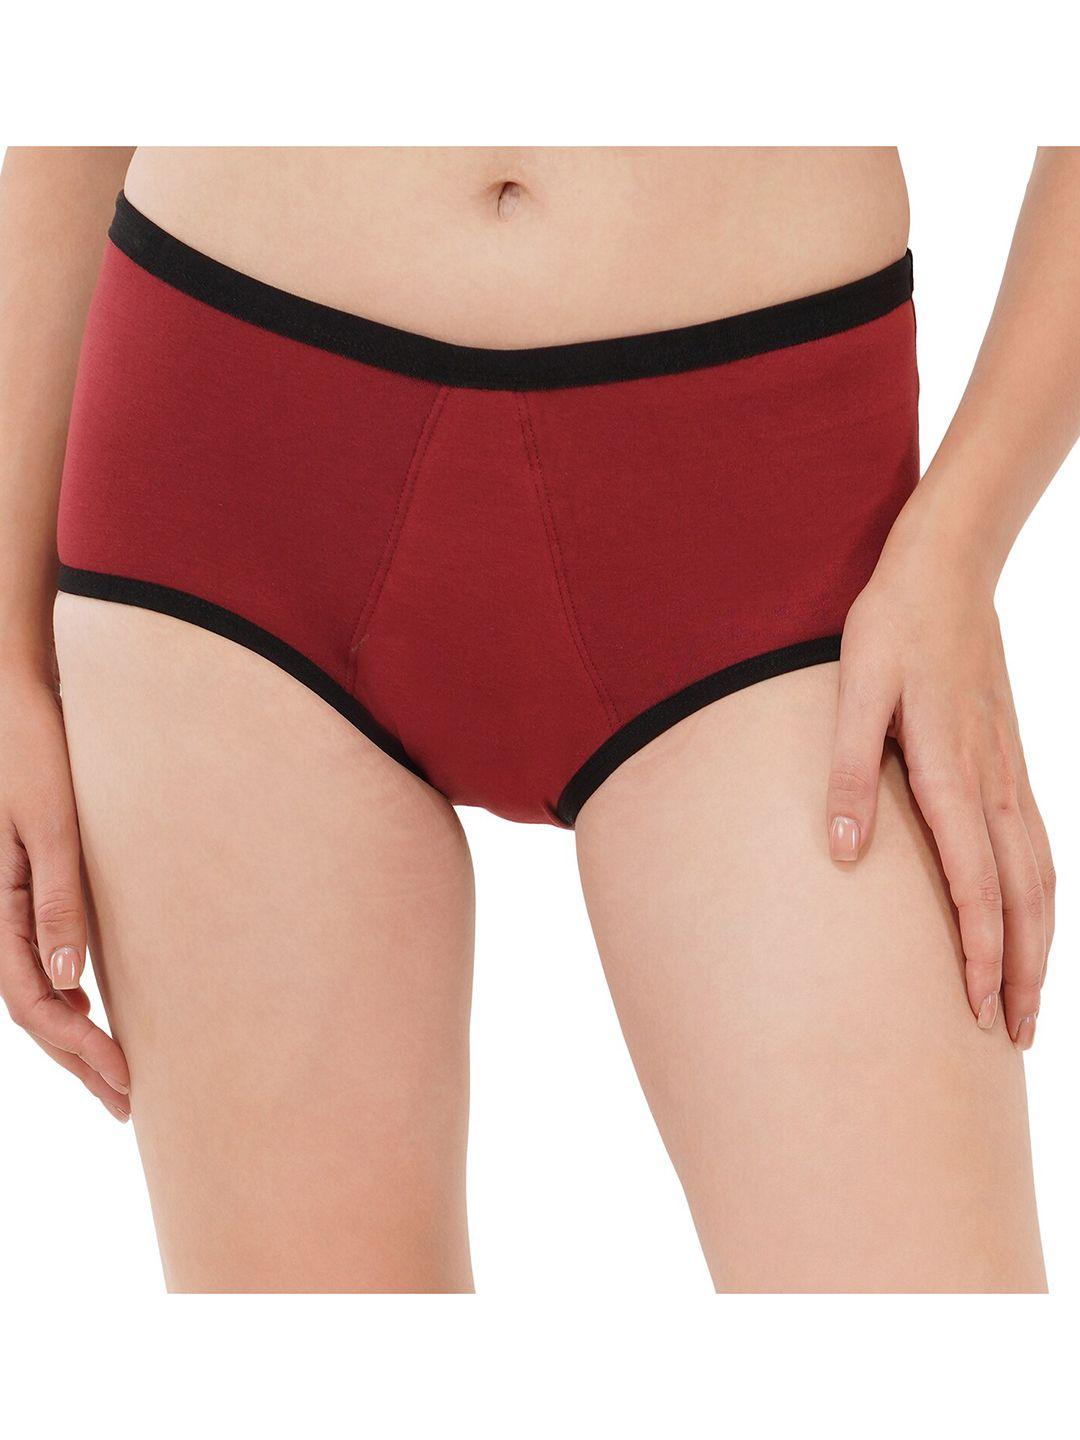 fabpad red reusable leak proof period panty lasts for 3 years without pads, cups & tampons